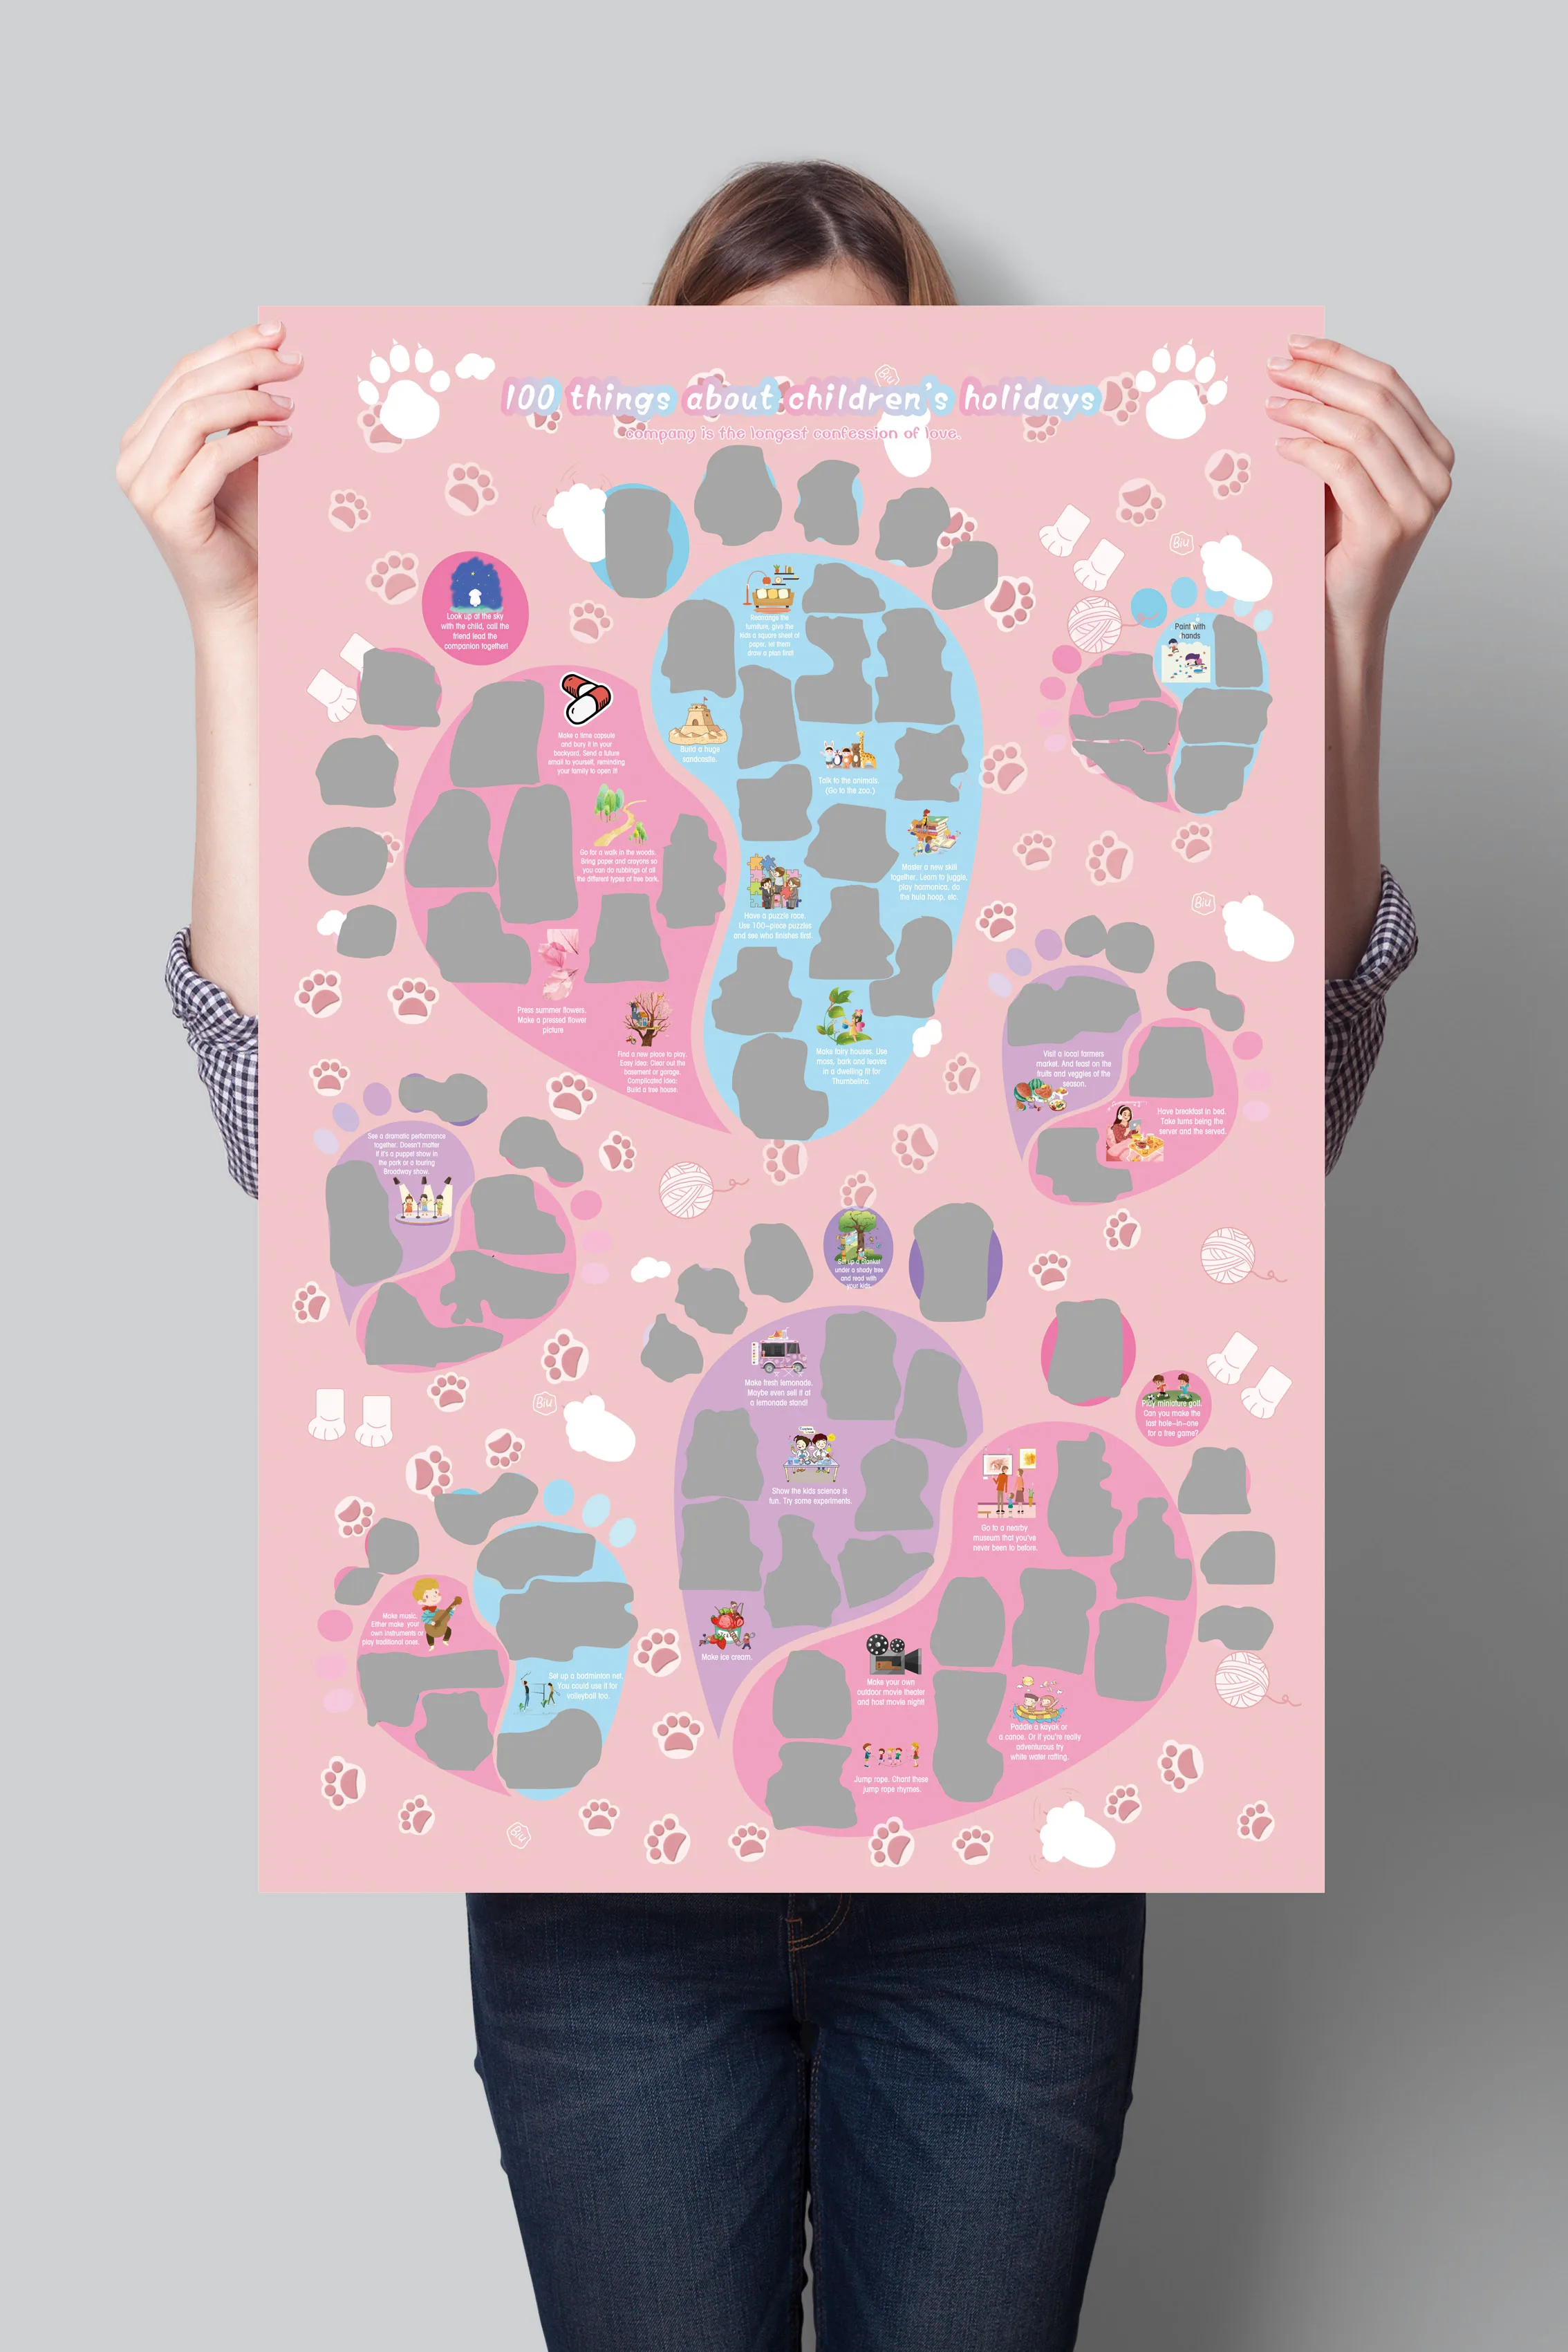 Pink And Blue Design For Baby Girl 100 Things To Do With Your Children Scratch Off Bucket List Poster For Baby Shower Gift